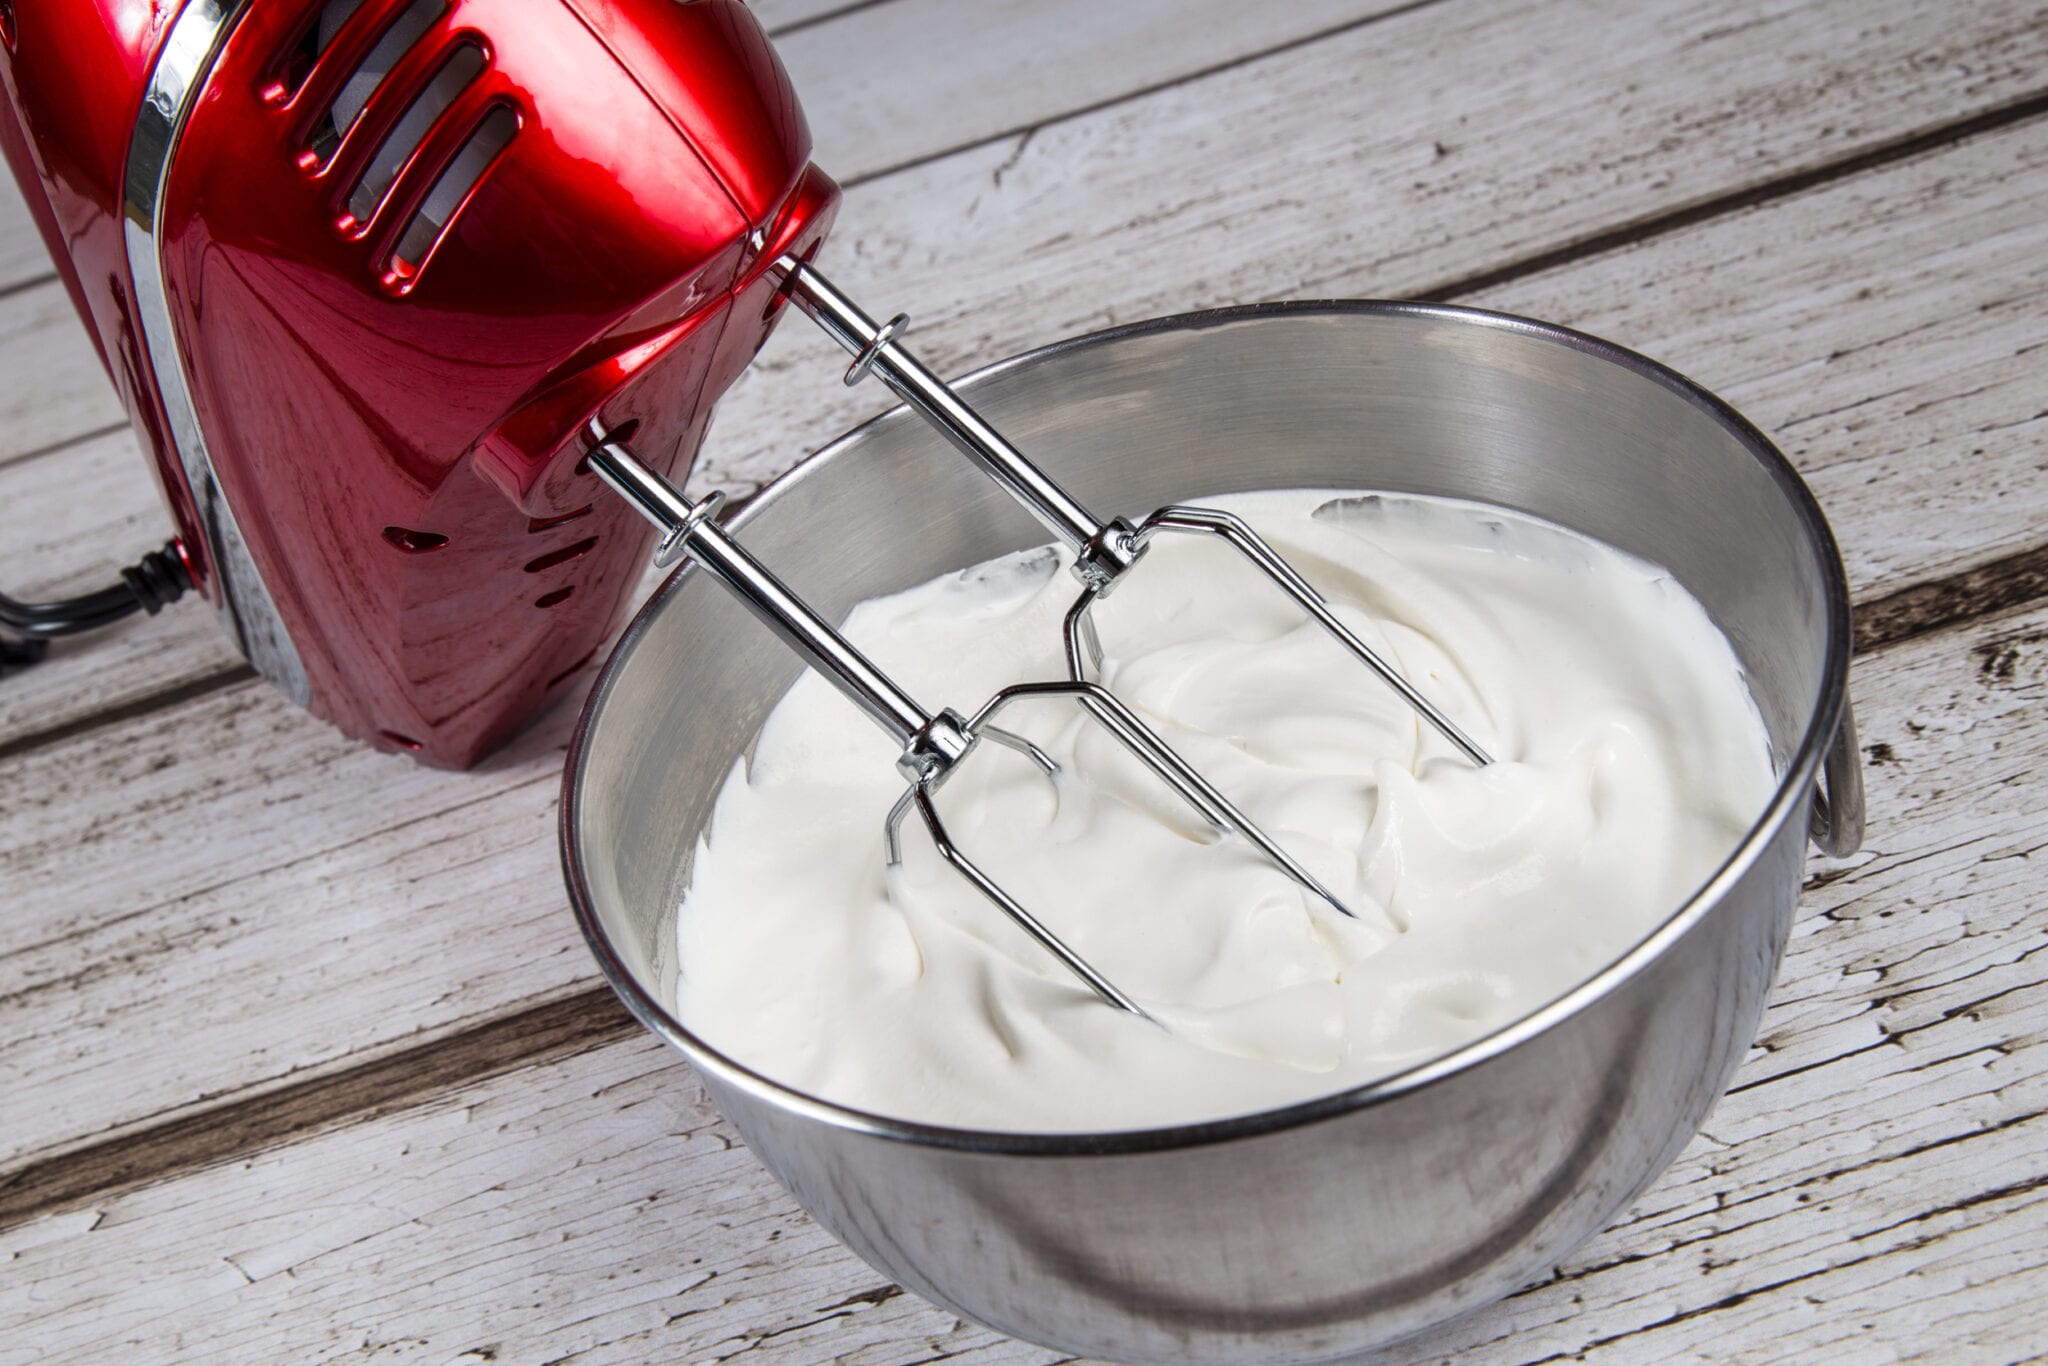 Electric hand mixer with whipped cream